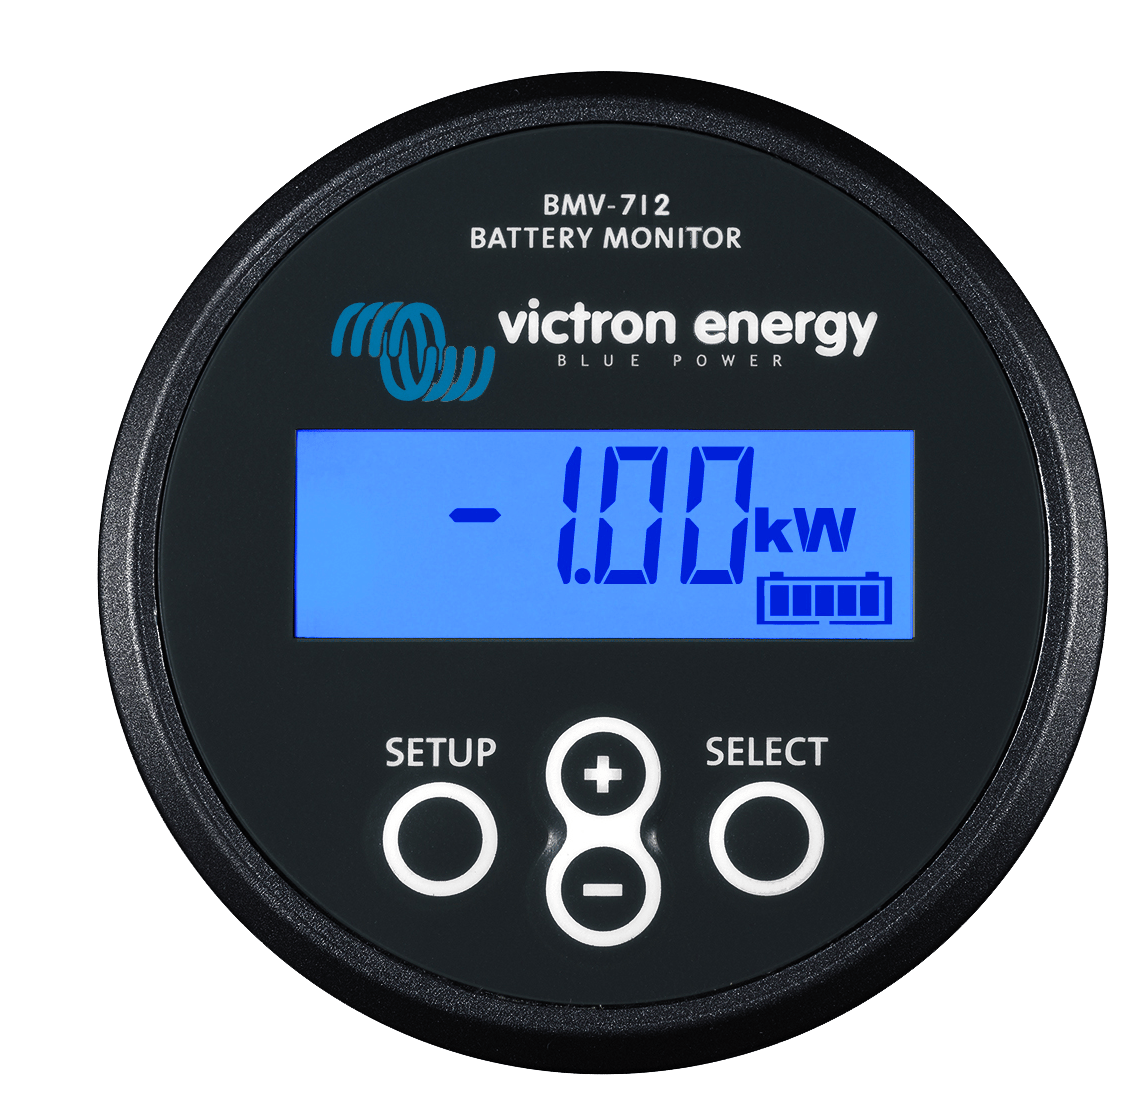 Does the black victron bmv 712 differ from the regular victron bmv 712?